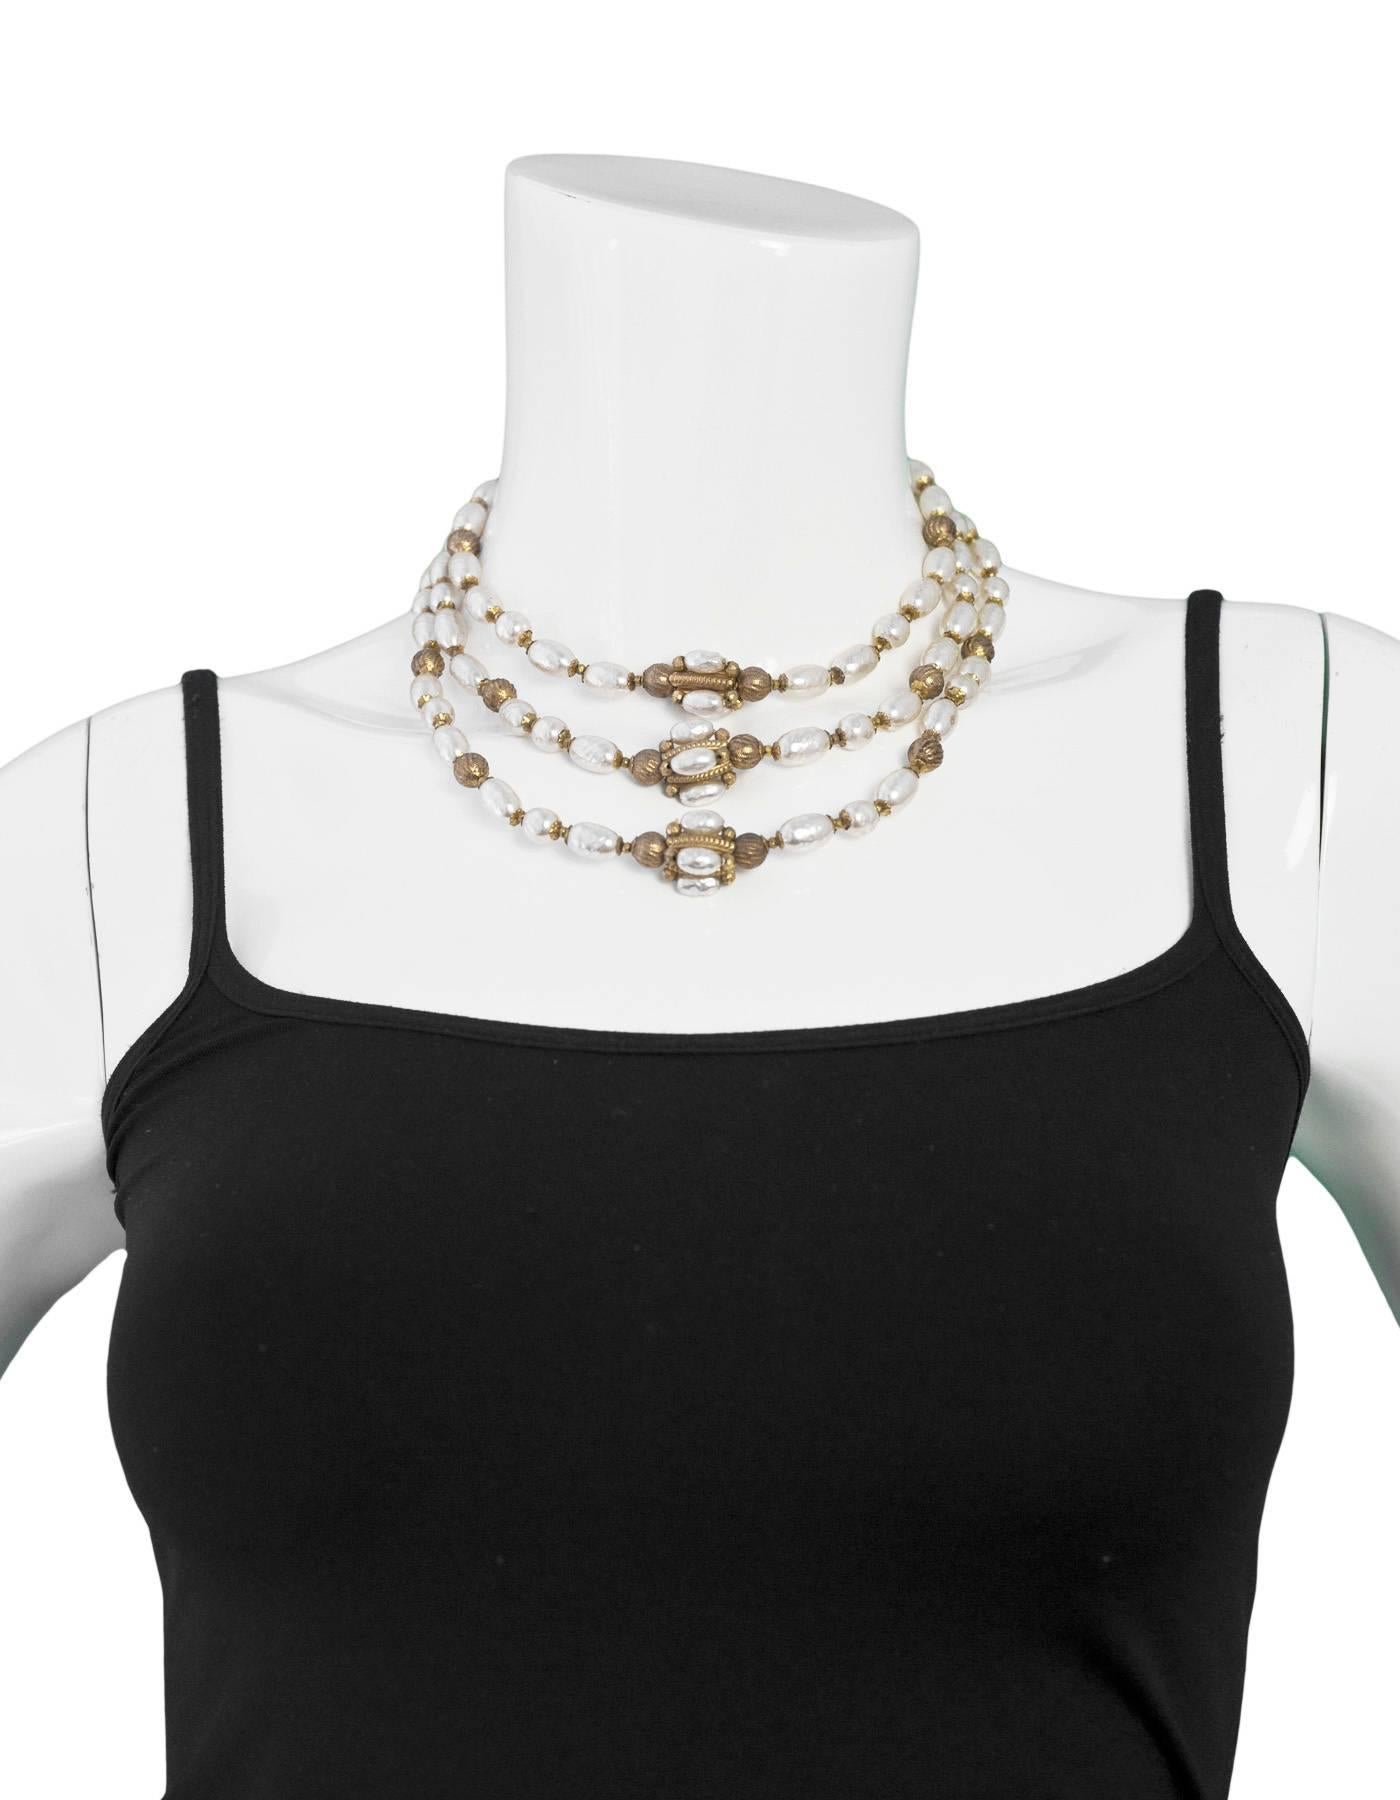 Miriam Haskell Goldtone and Faux Pearl Necklace

Color: Ivory, gold
Materials: Faux pearls, metal
Closure/Opening: Push clasp closure
Stamp: Miriam Haskell
Overall Condition: Excellent pre-owned condition, slight tarnish at metal 

Measurements: